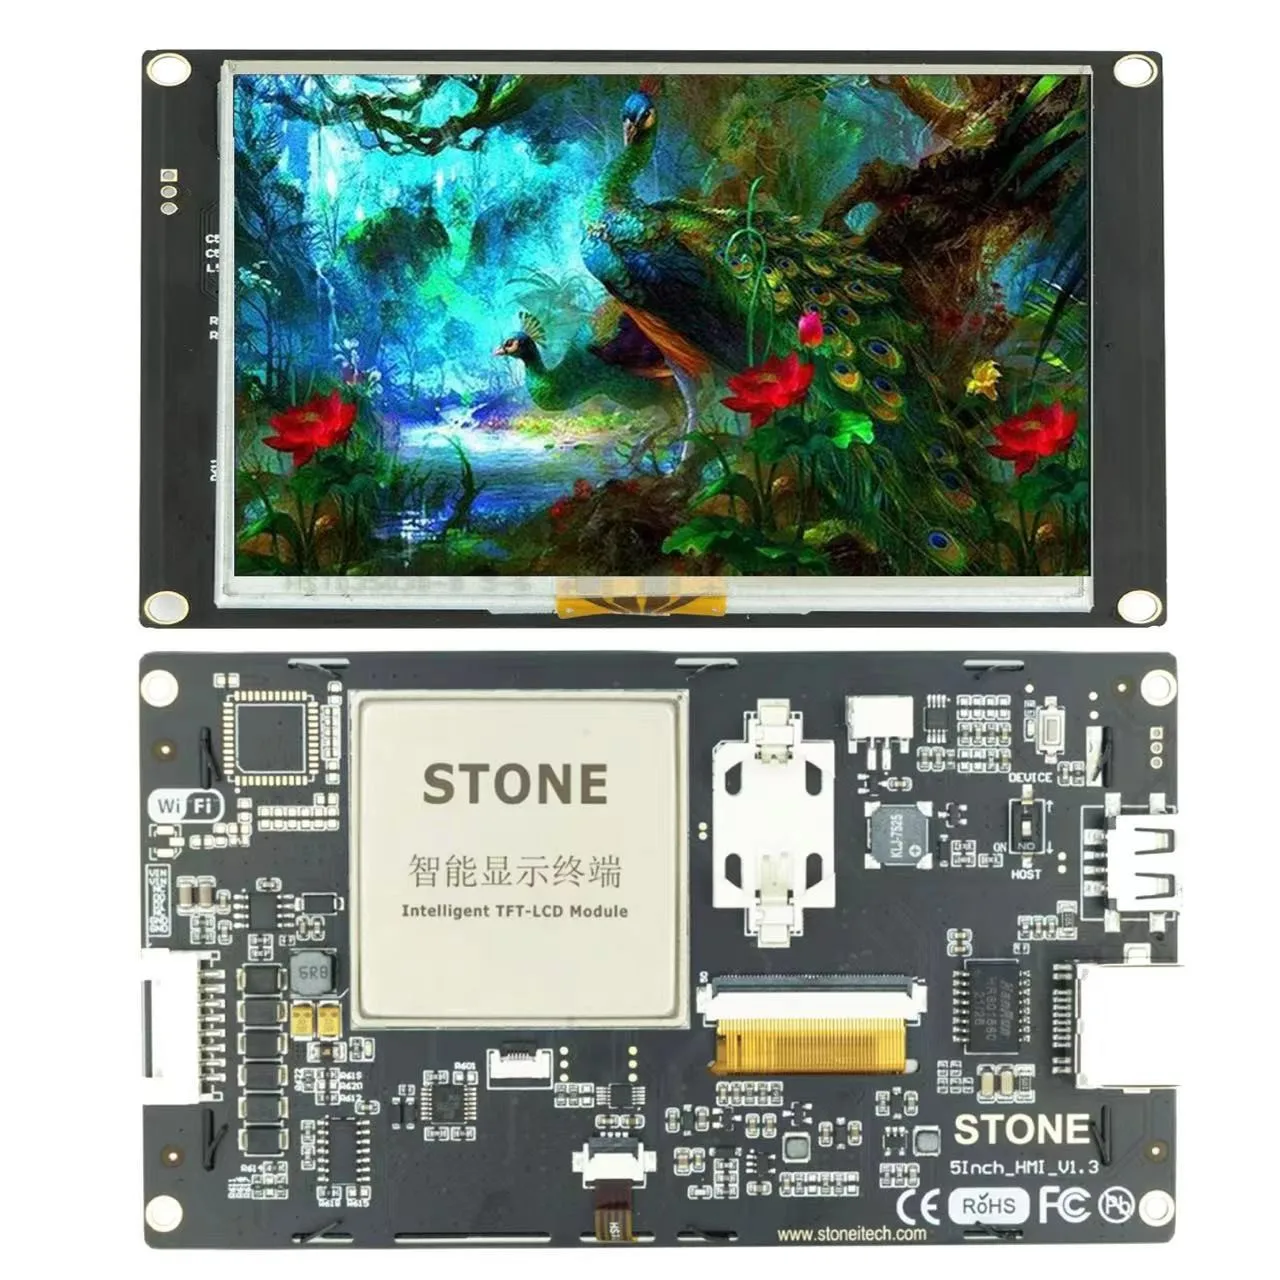 STONE Industrial 5'' 800*480 Built-in RTC / 256M Flash Capacity / Faster MCU Clock HMI Touch Display STWI070WT-01